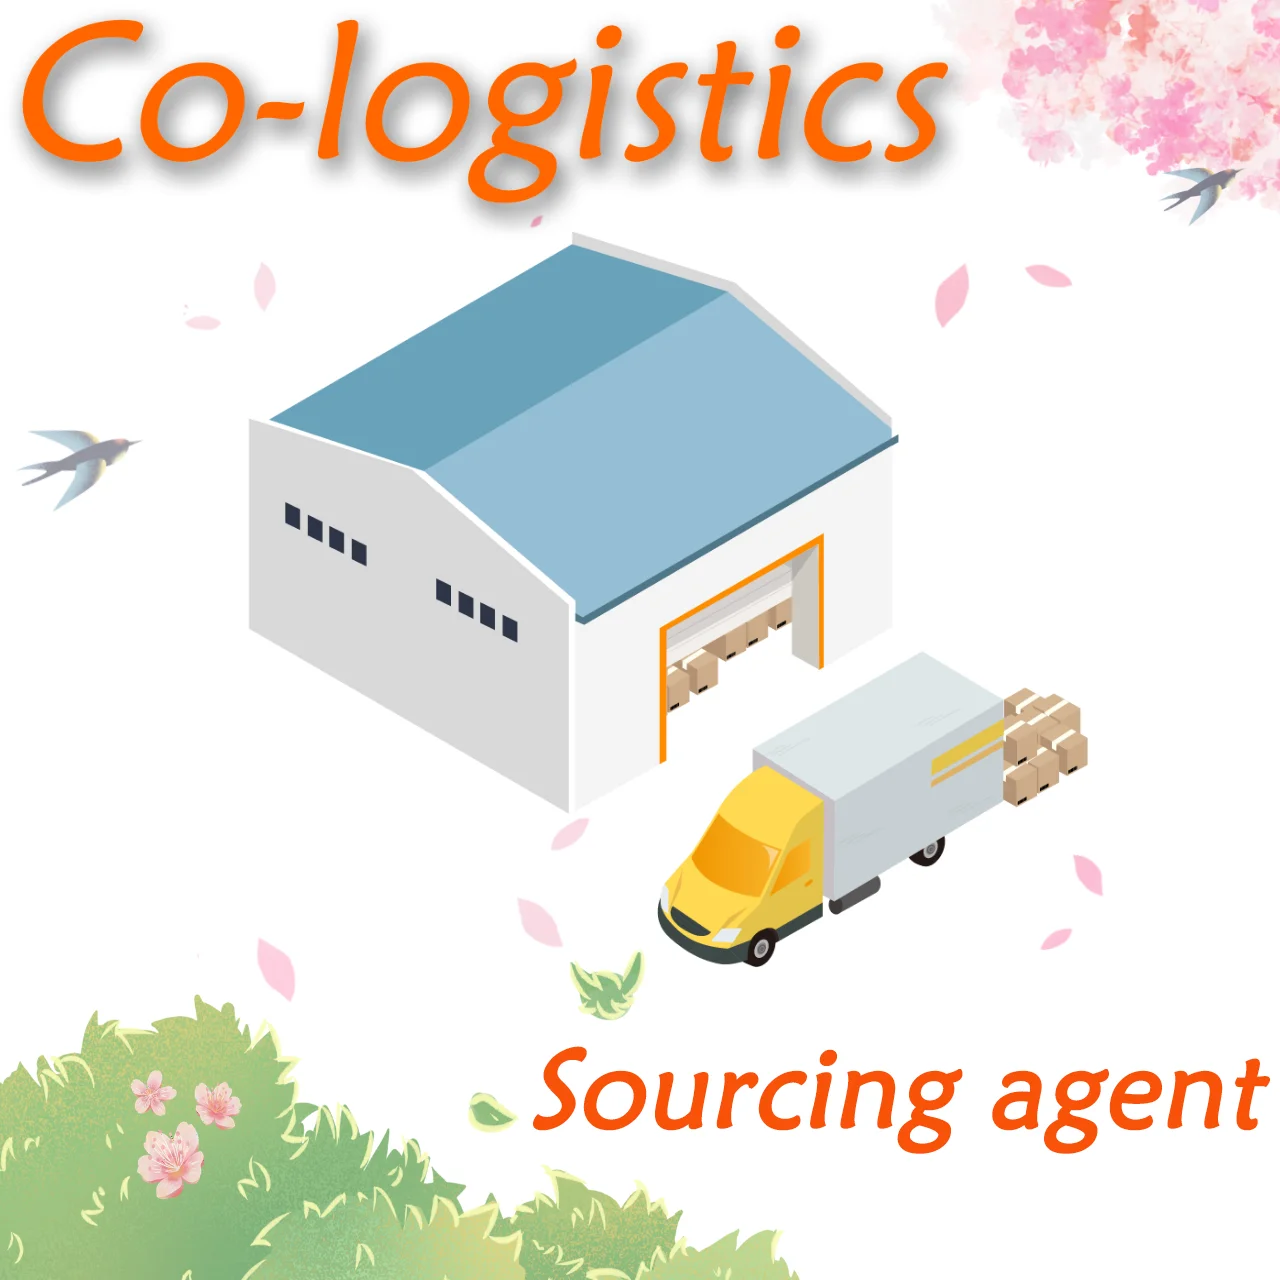 Express logistics courier shipping cost dropshipping agent from China